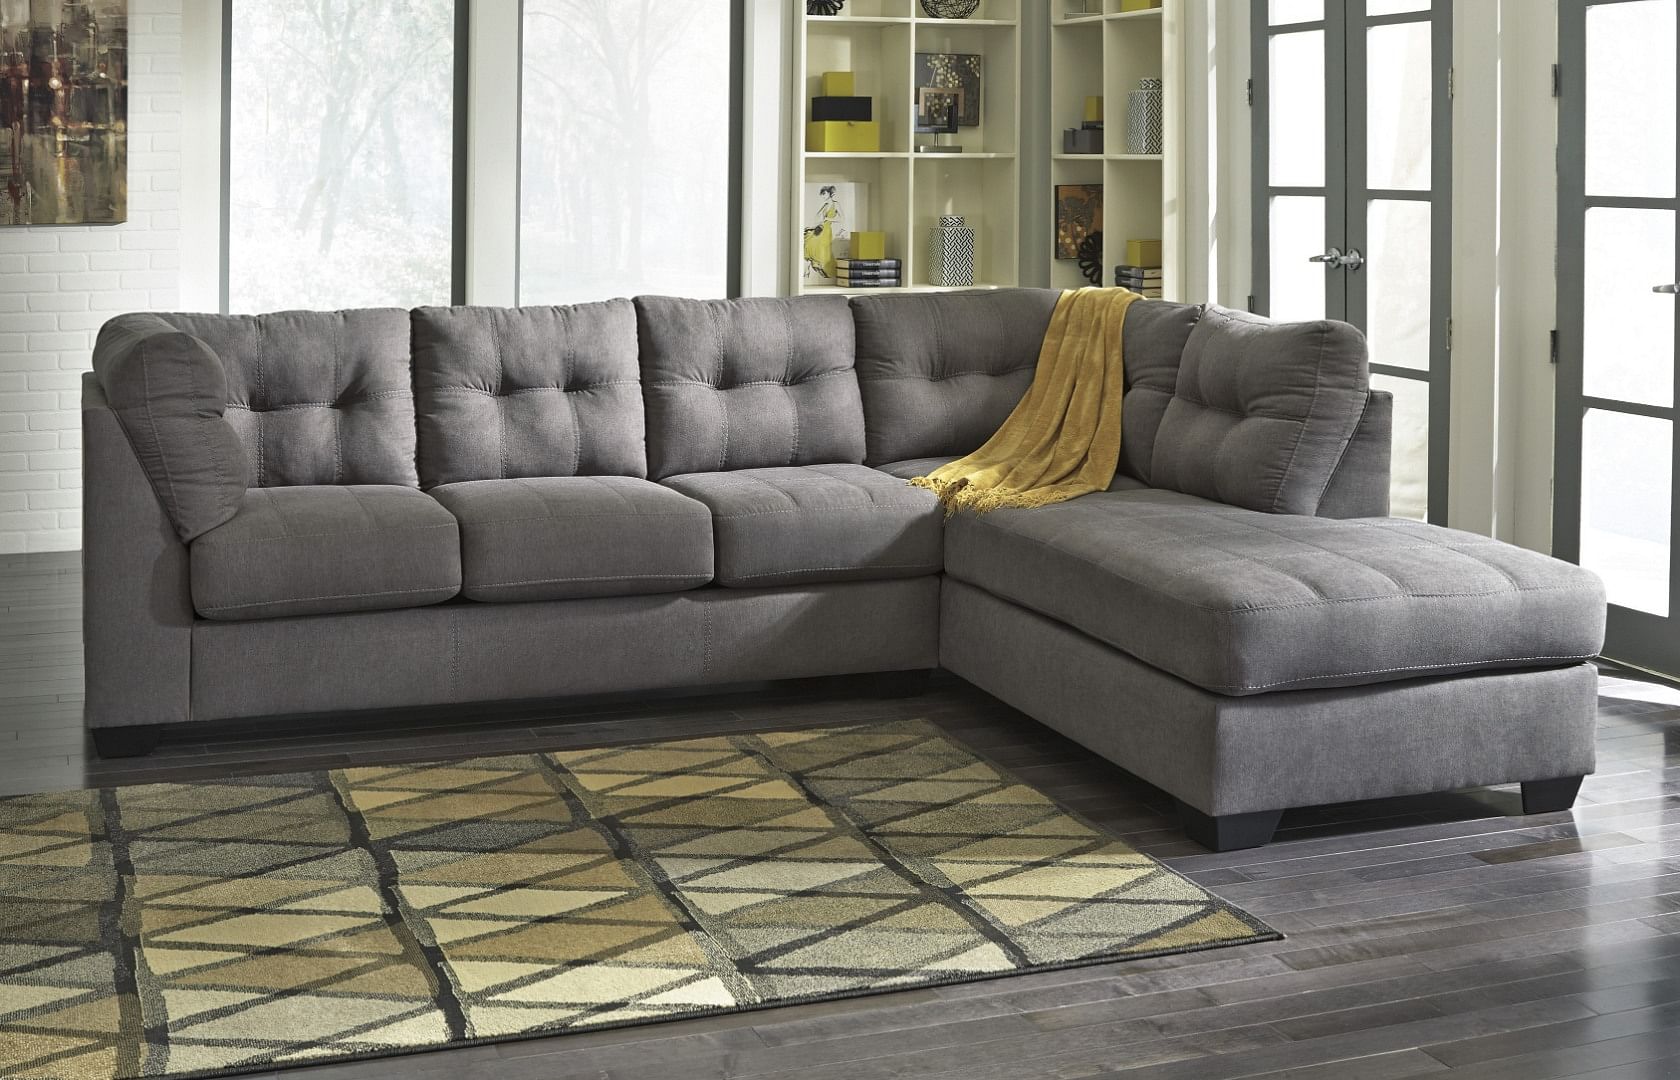 Ashley Furniture - Maier Sectional with Right Chai...